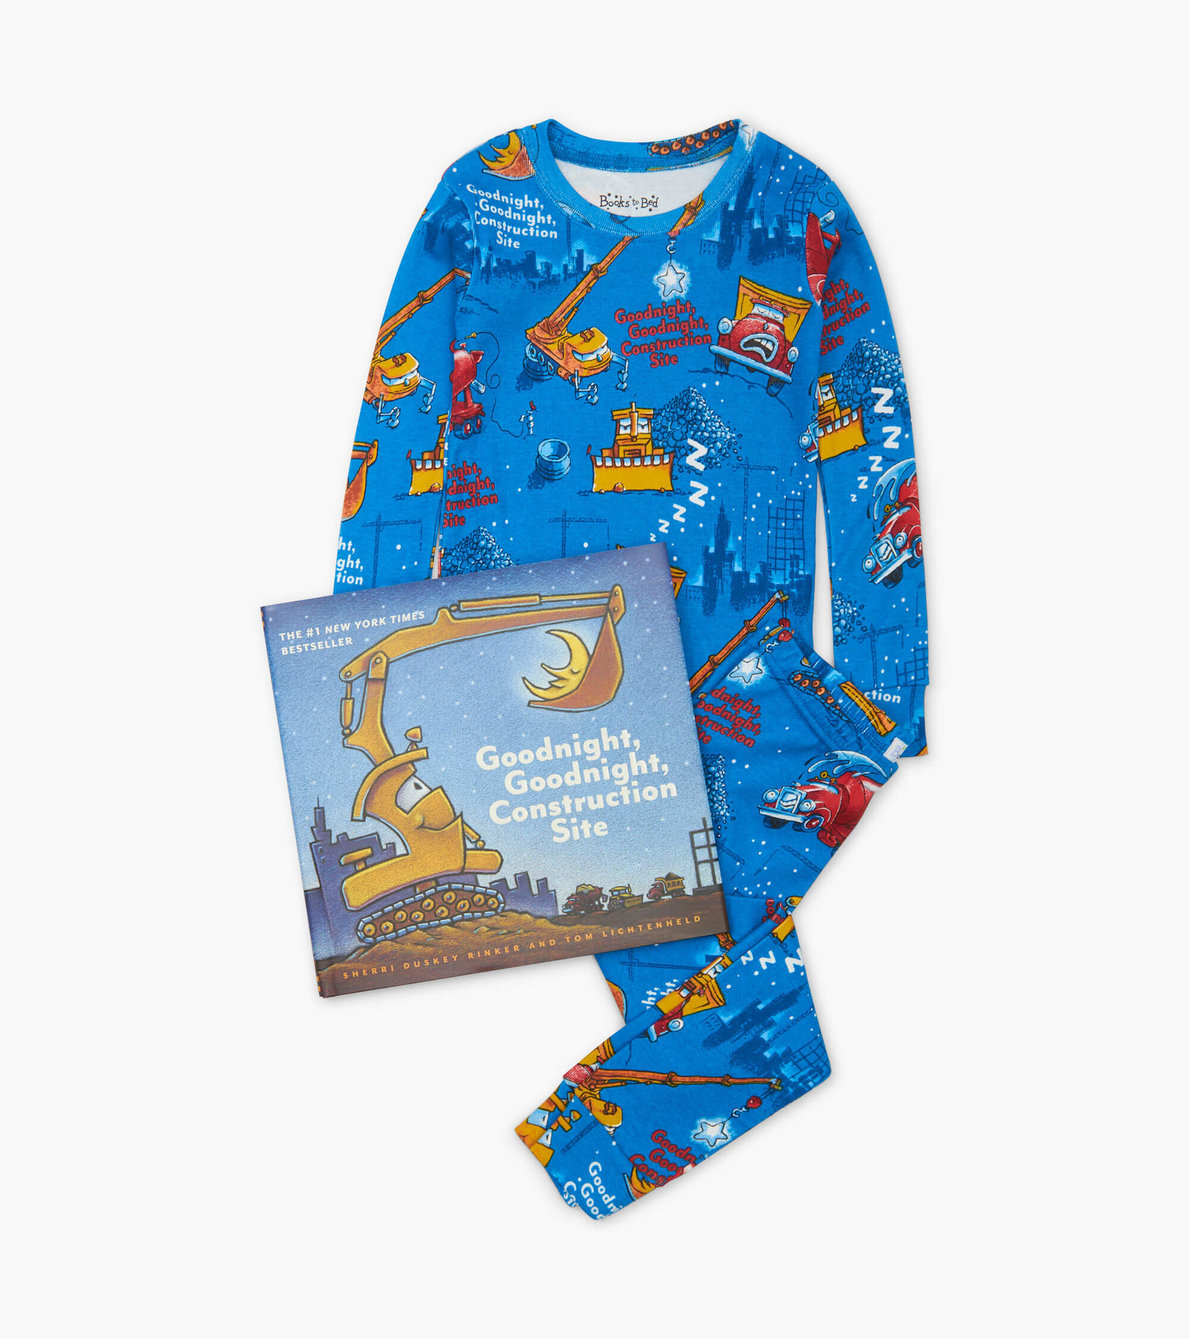 View larger image of Goodnight, Goodnight, Construction Site Kids Book and Pajama Set